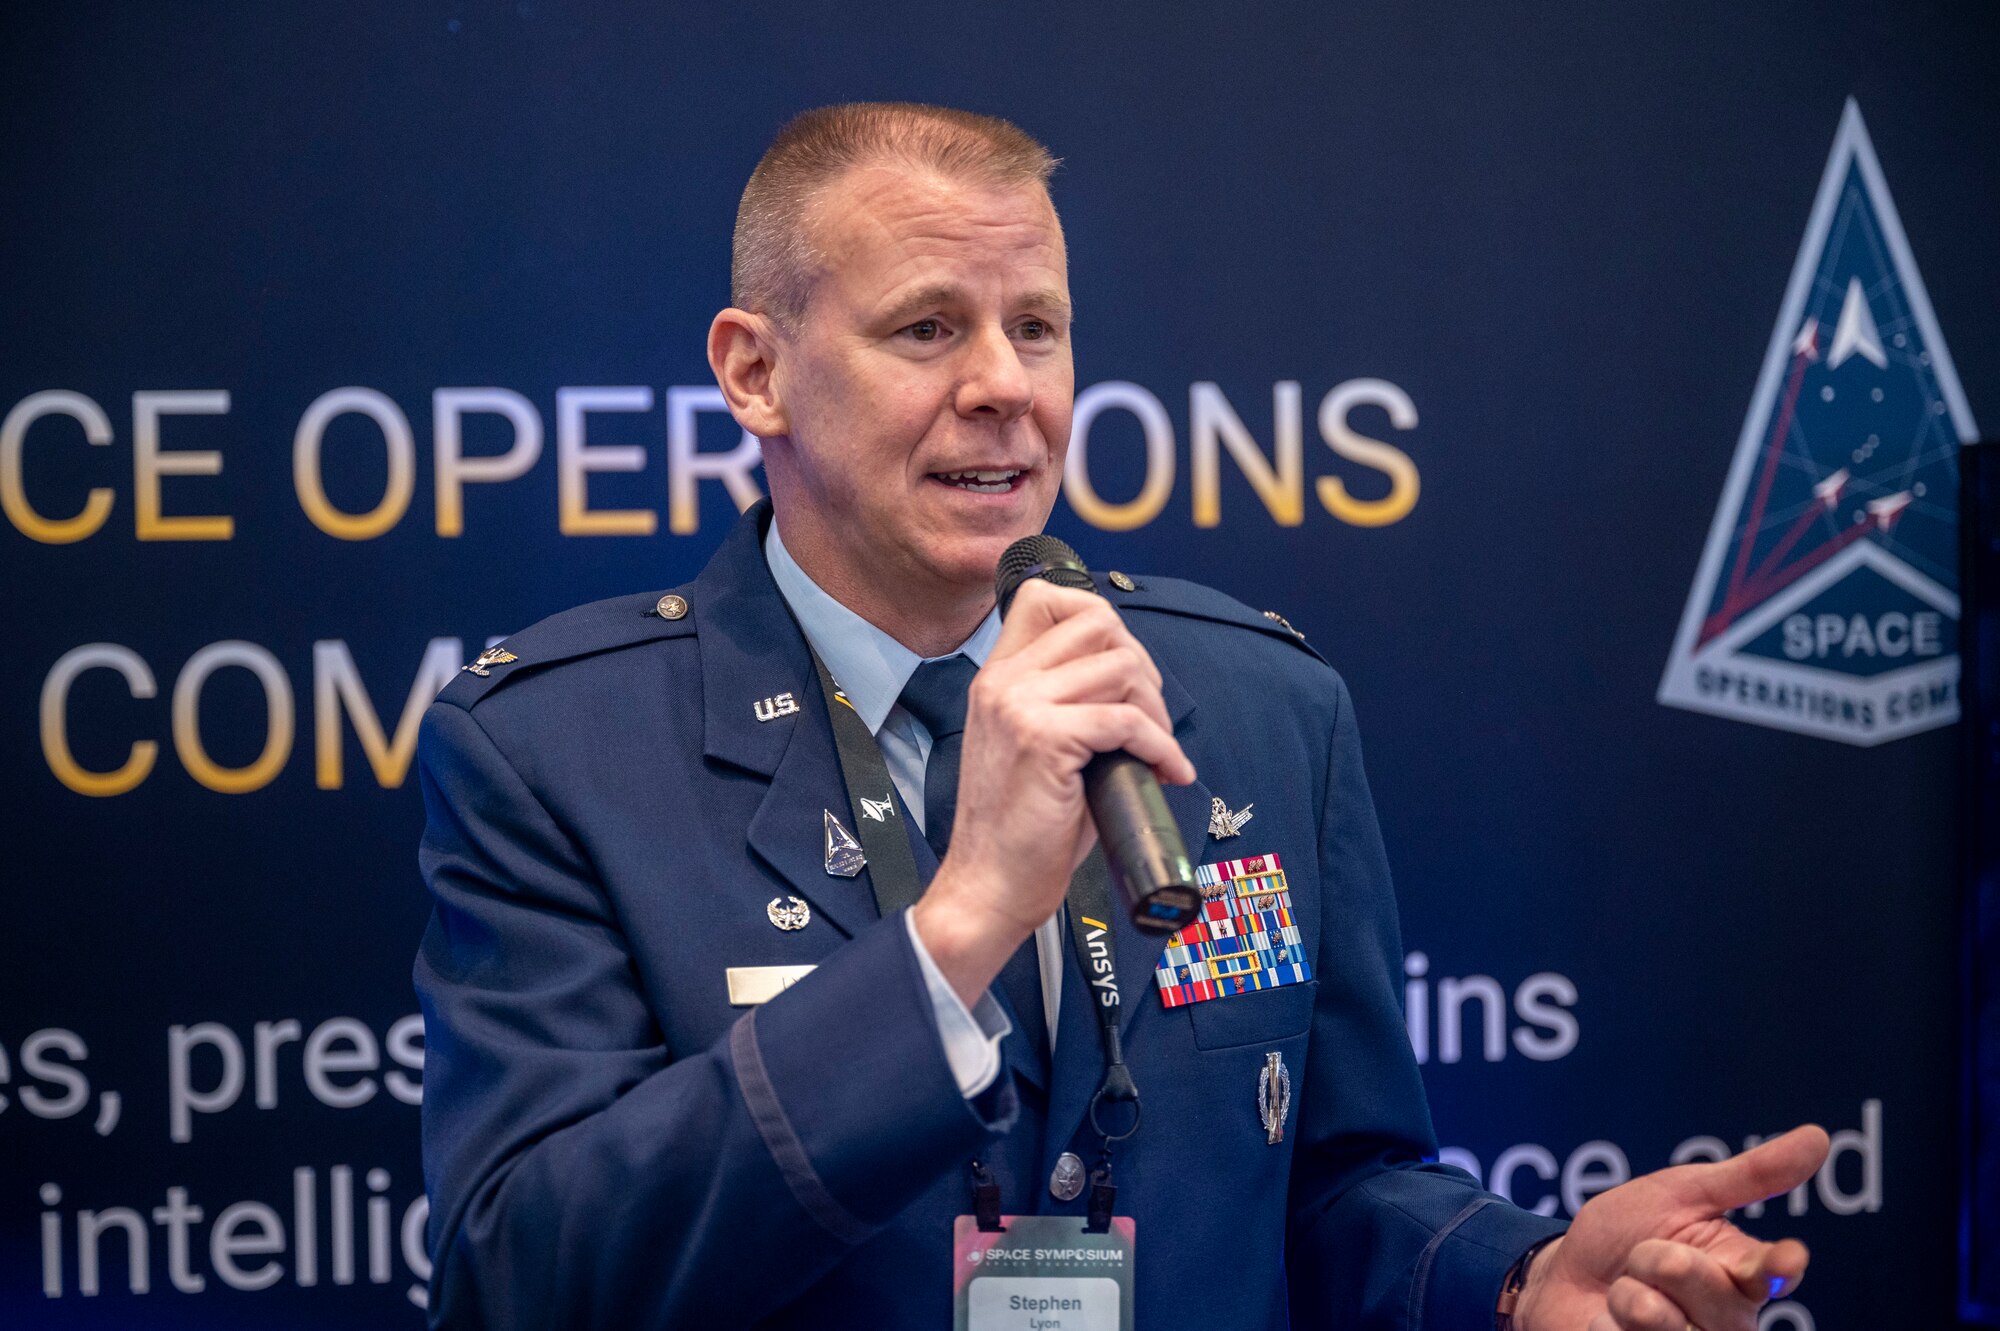 Space Delta 15 Commander Col. Stephen Lyon provided a mission brief during the 38th Space Symposium at the Broadmoor, Colorado Springs, Colo., April 18, 2023. Lyon discussed DEL 15's mission to provide service command-and-control (C2) capability, mission ready crew forces, skills training, certifications, intelligence, surveillance, and reconnaissance (ISR), and support and cyber mission defense, and special mission support to the Joint Task Force-Space Defense and its National Space Defense Center. (US. Space Force photo by SSgt Jose A. Rodriguez Jr)